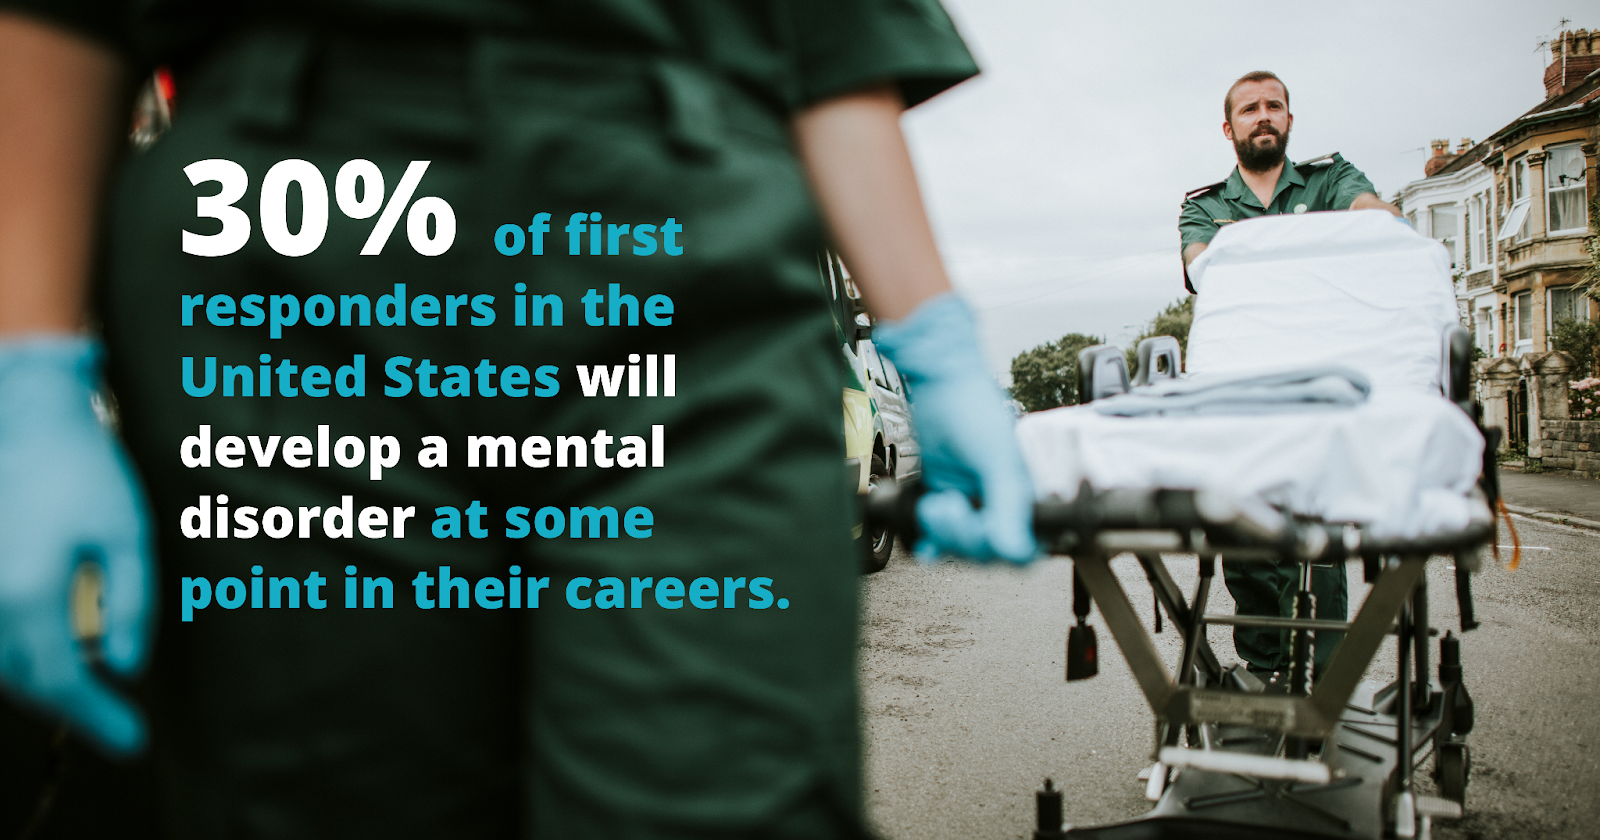 30% of first responders in the united states will develop a mental disorder at some point in their careers.